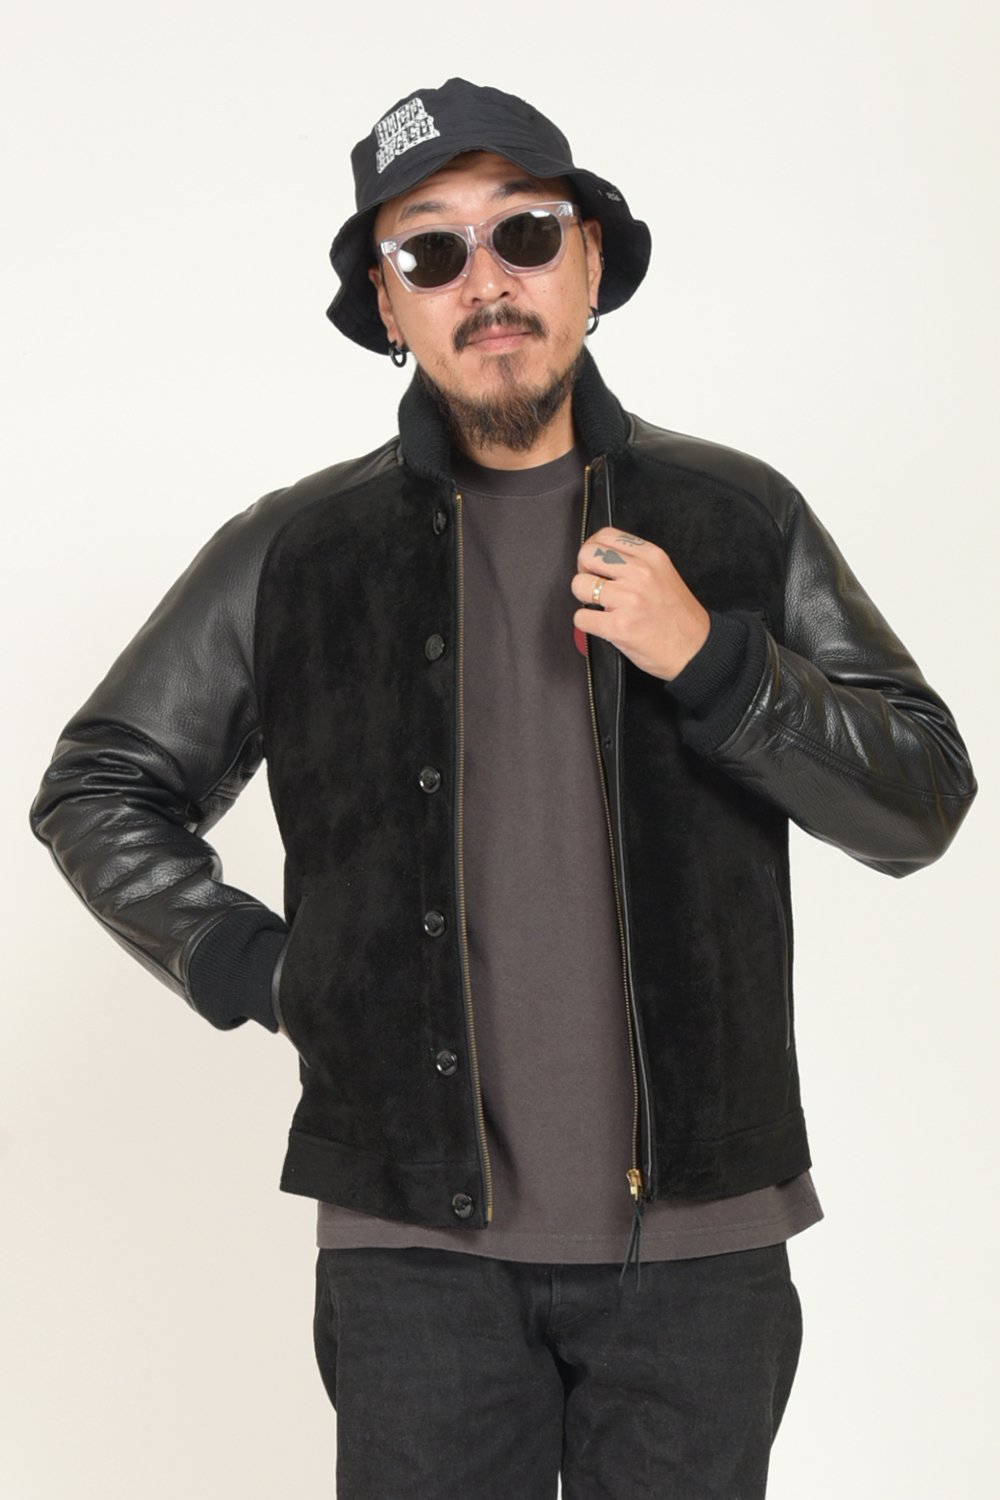 Y'2 LEATHER(ワイツーレザー) レザージャケット STEER SUEDE×STEER OIL RIB JKT LB-136 通販正規取扱 |  ハーレムストア公式通販サイト